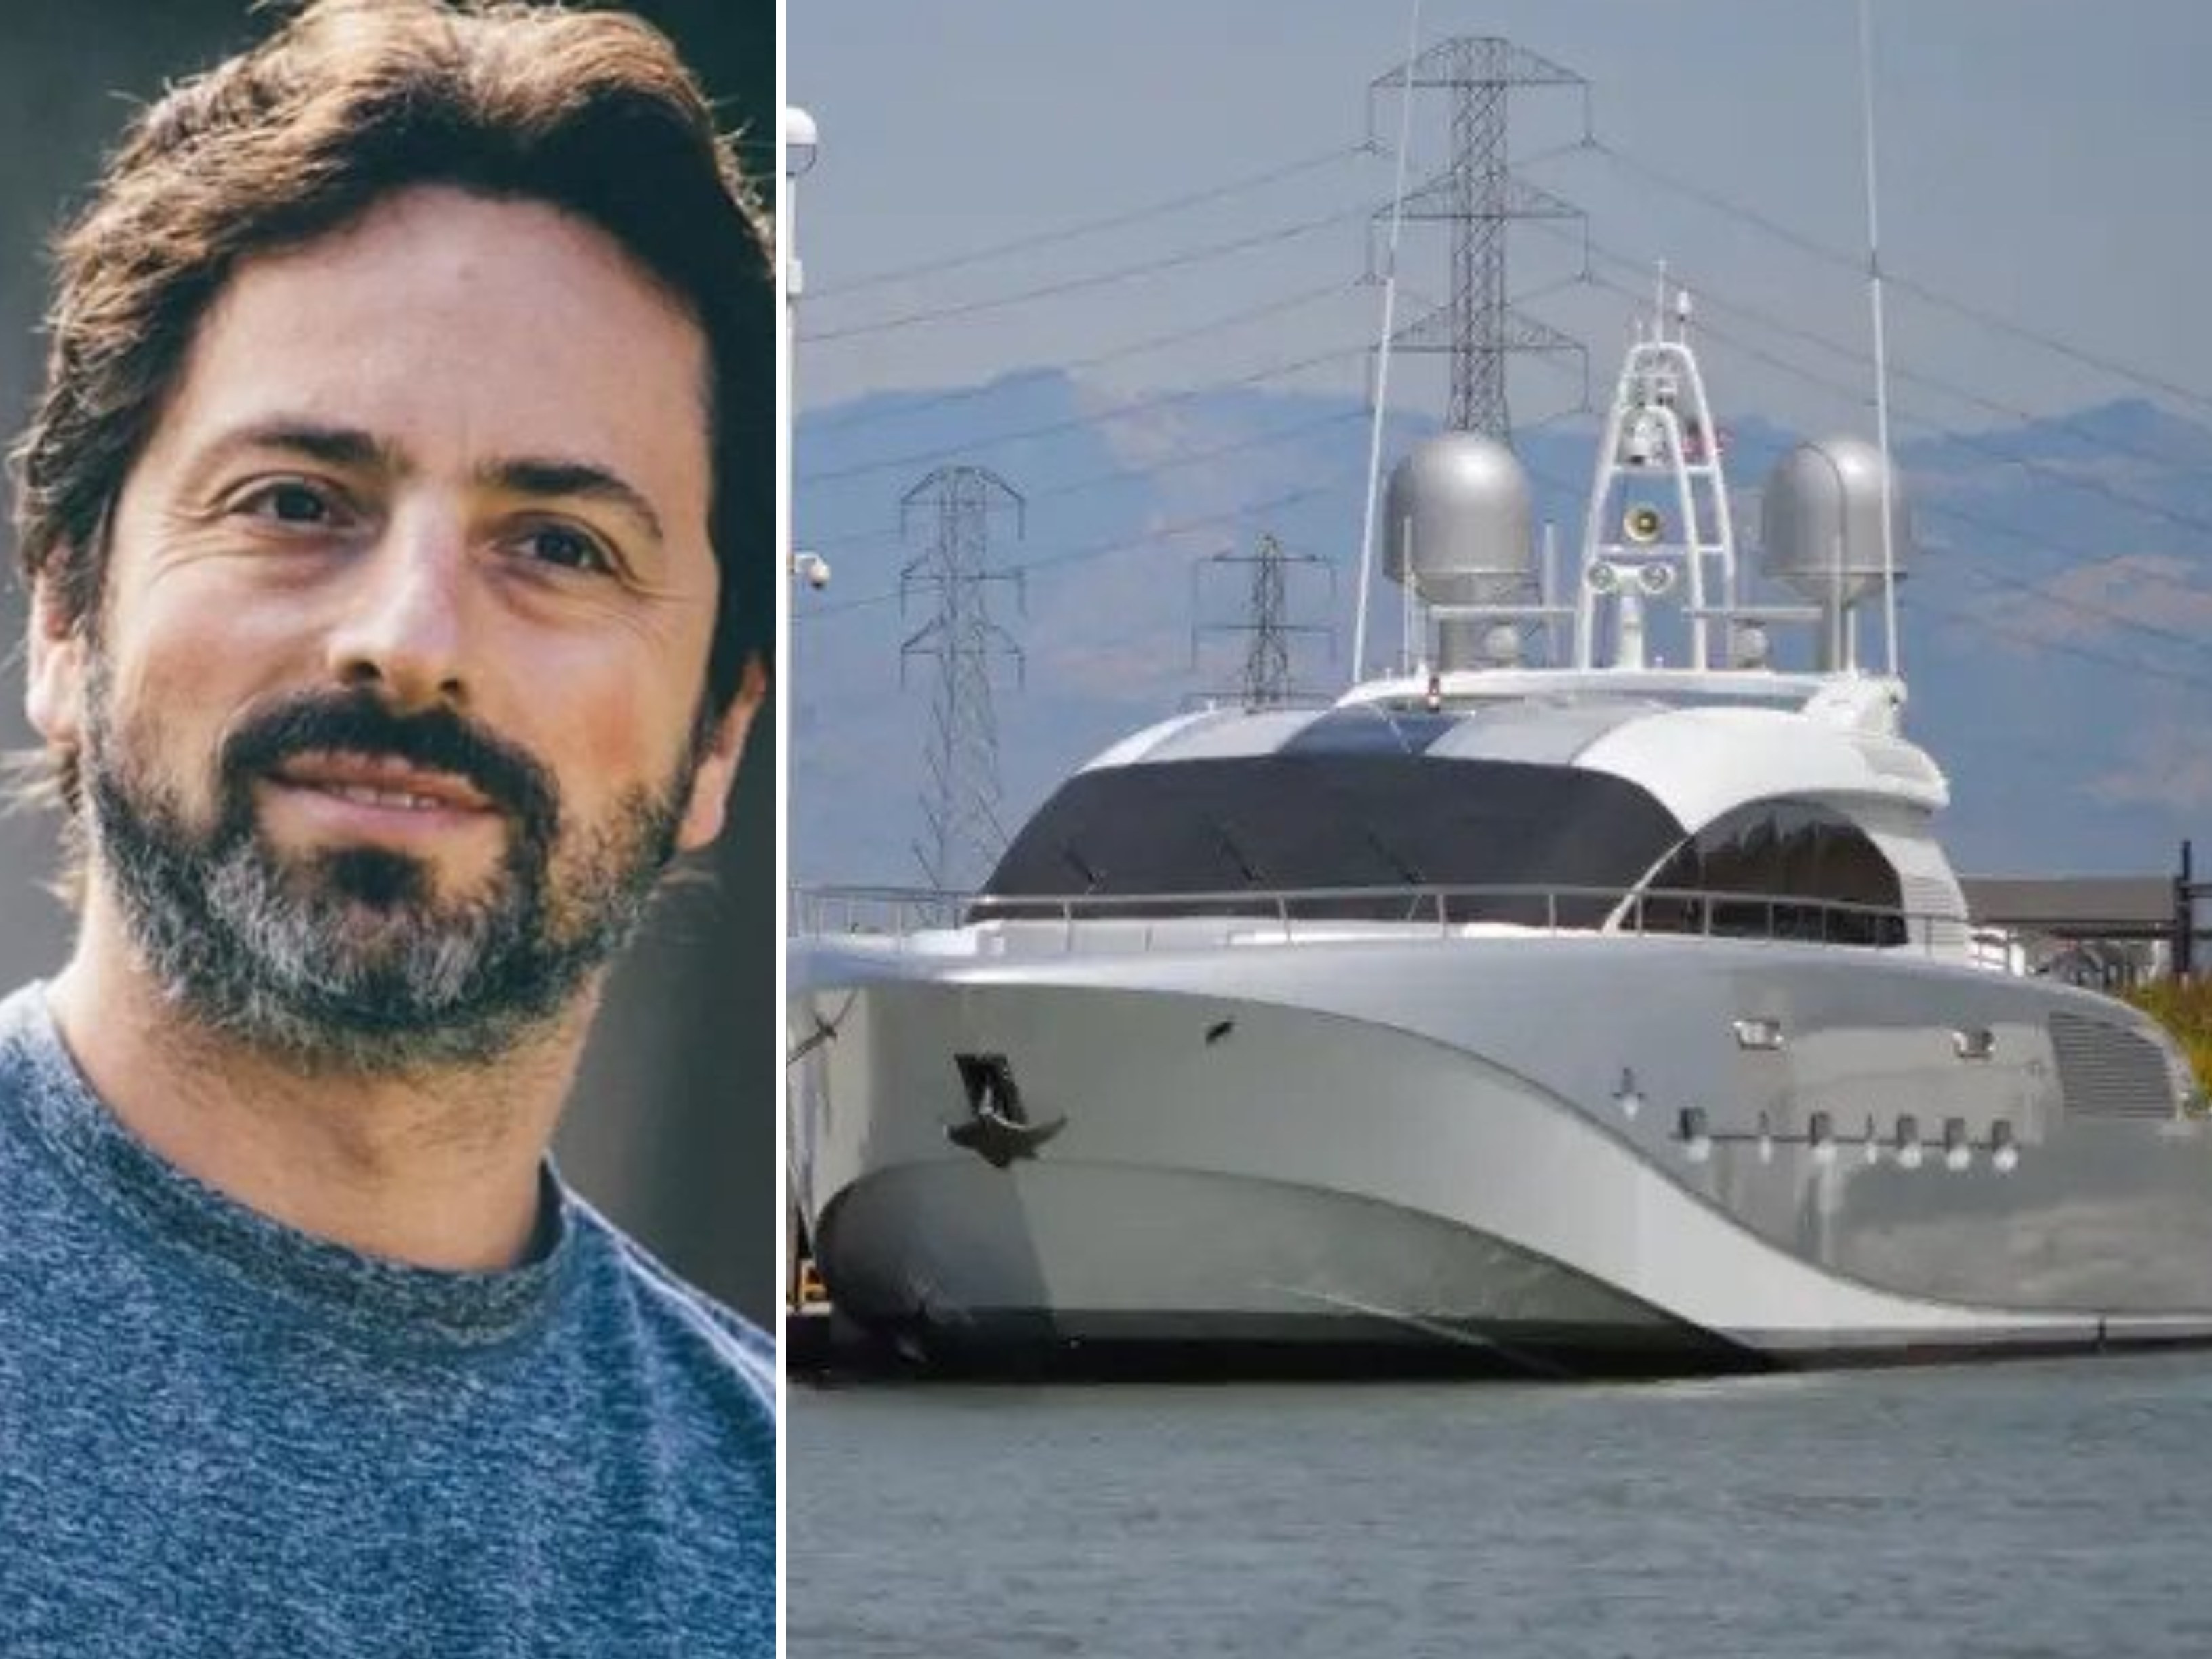 Google founder Sergey Brin has a passion for yachts, jet skis and, well, anything that floats, it seems. Photos: @thebiographypen/Instagram, Business Insider